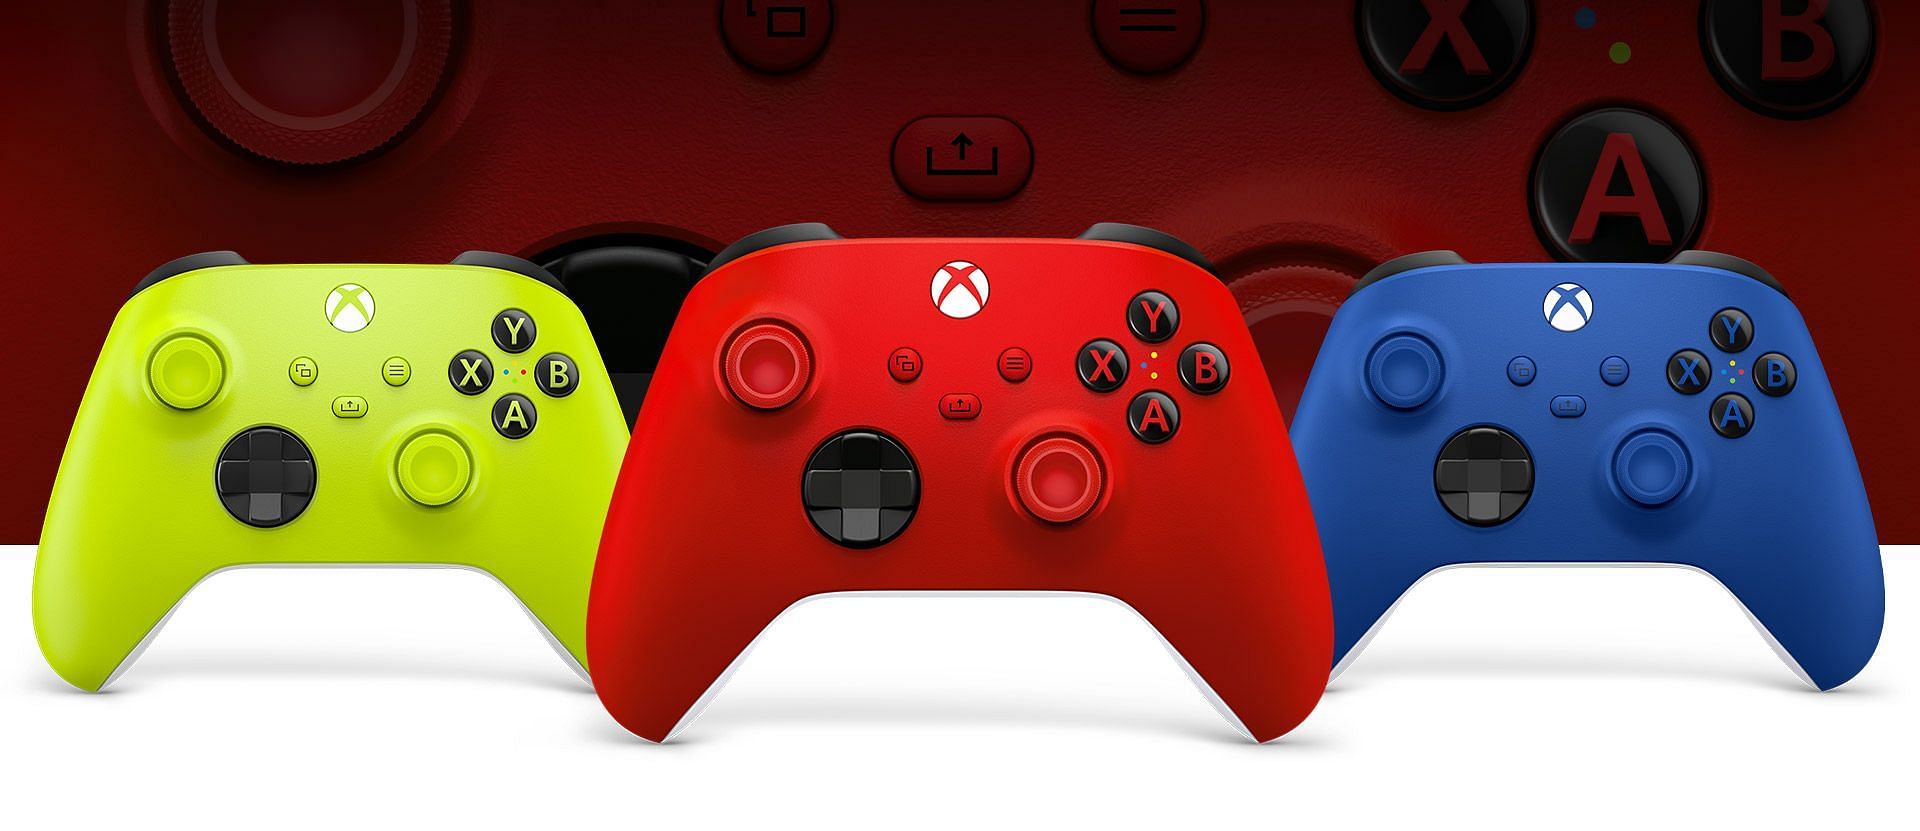 Xbox controllers, another of the options available to players (Image via xbox.com)